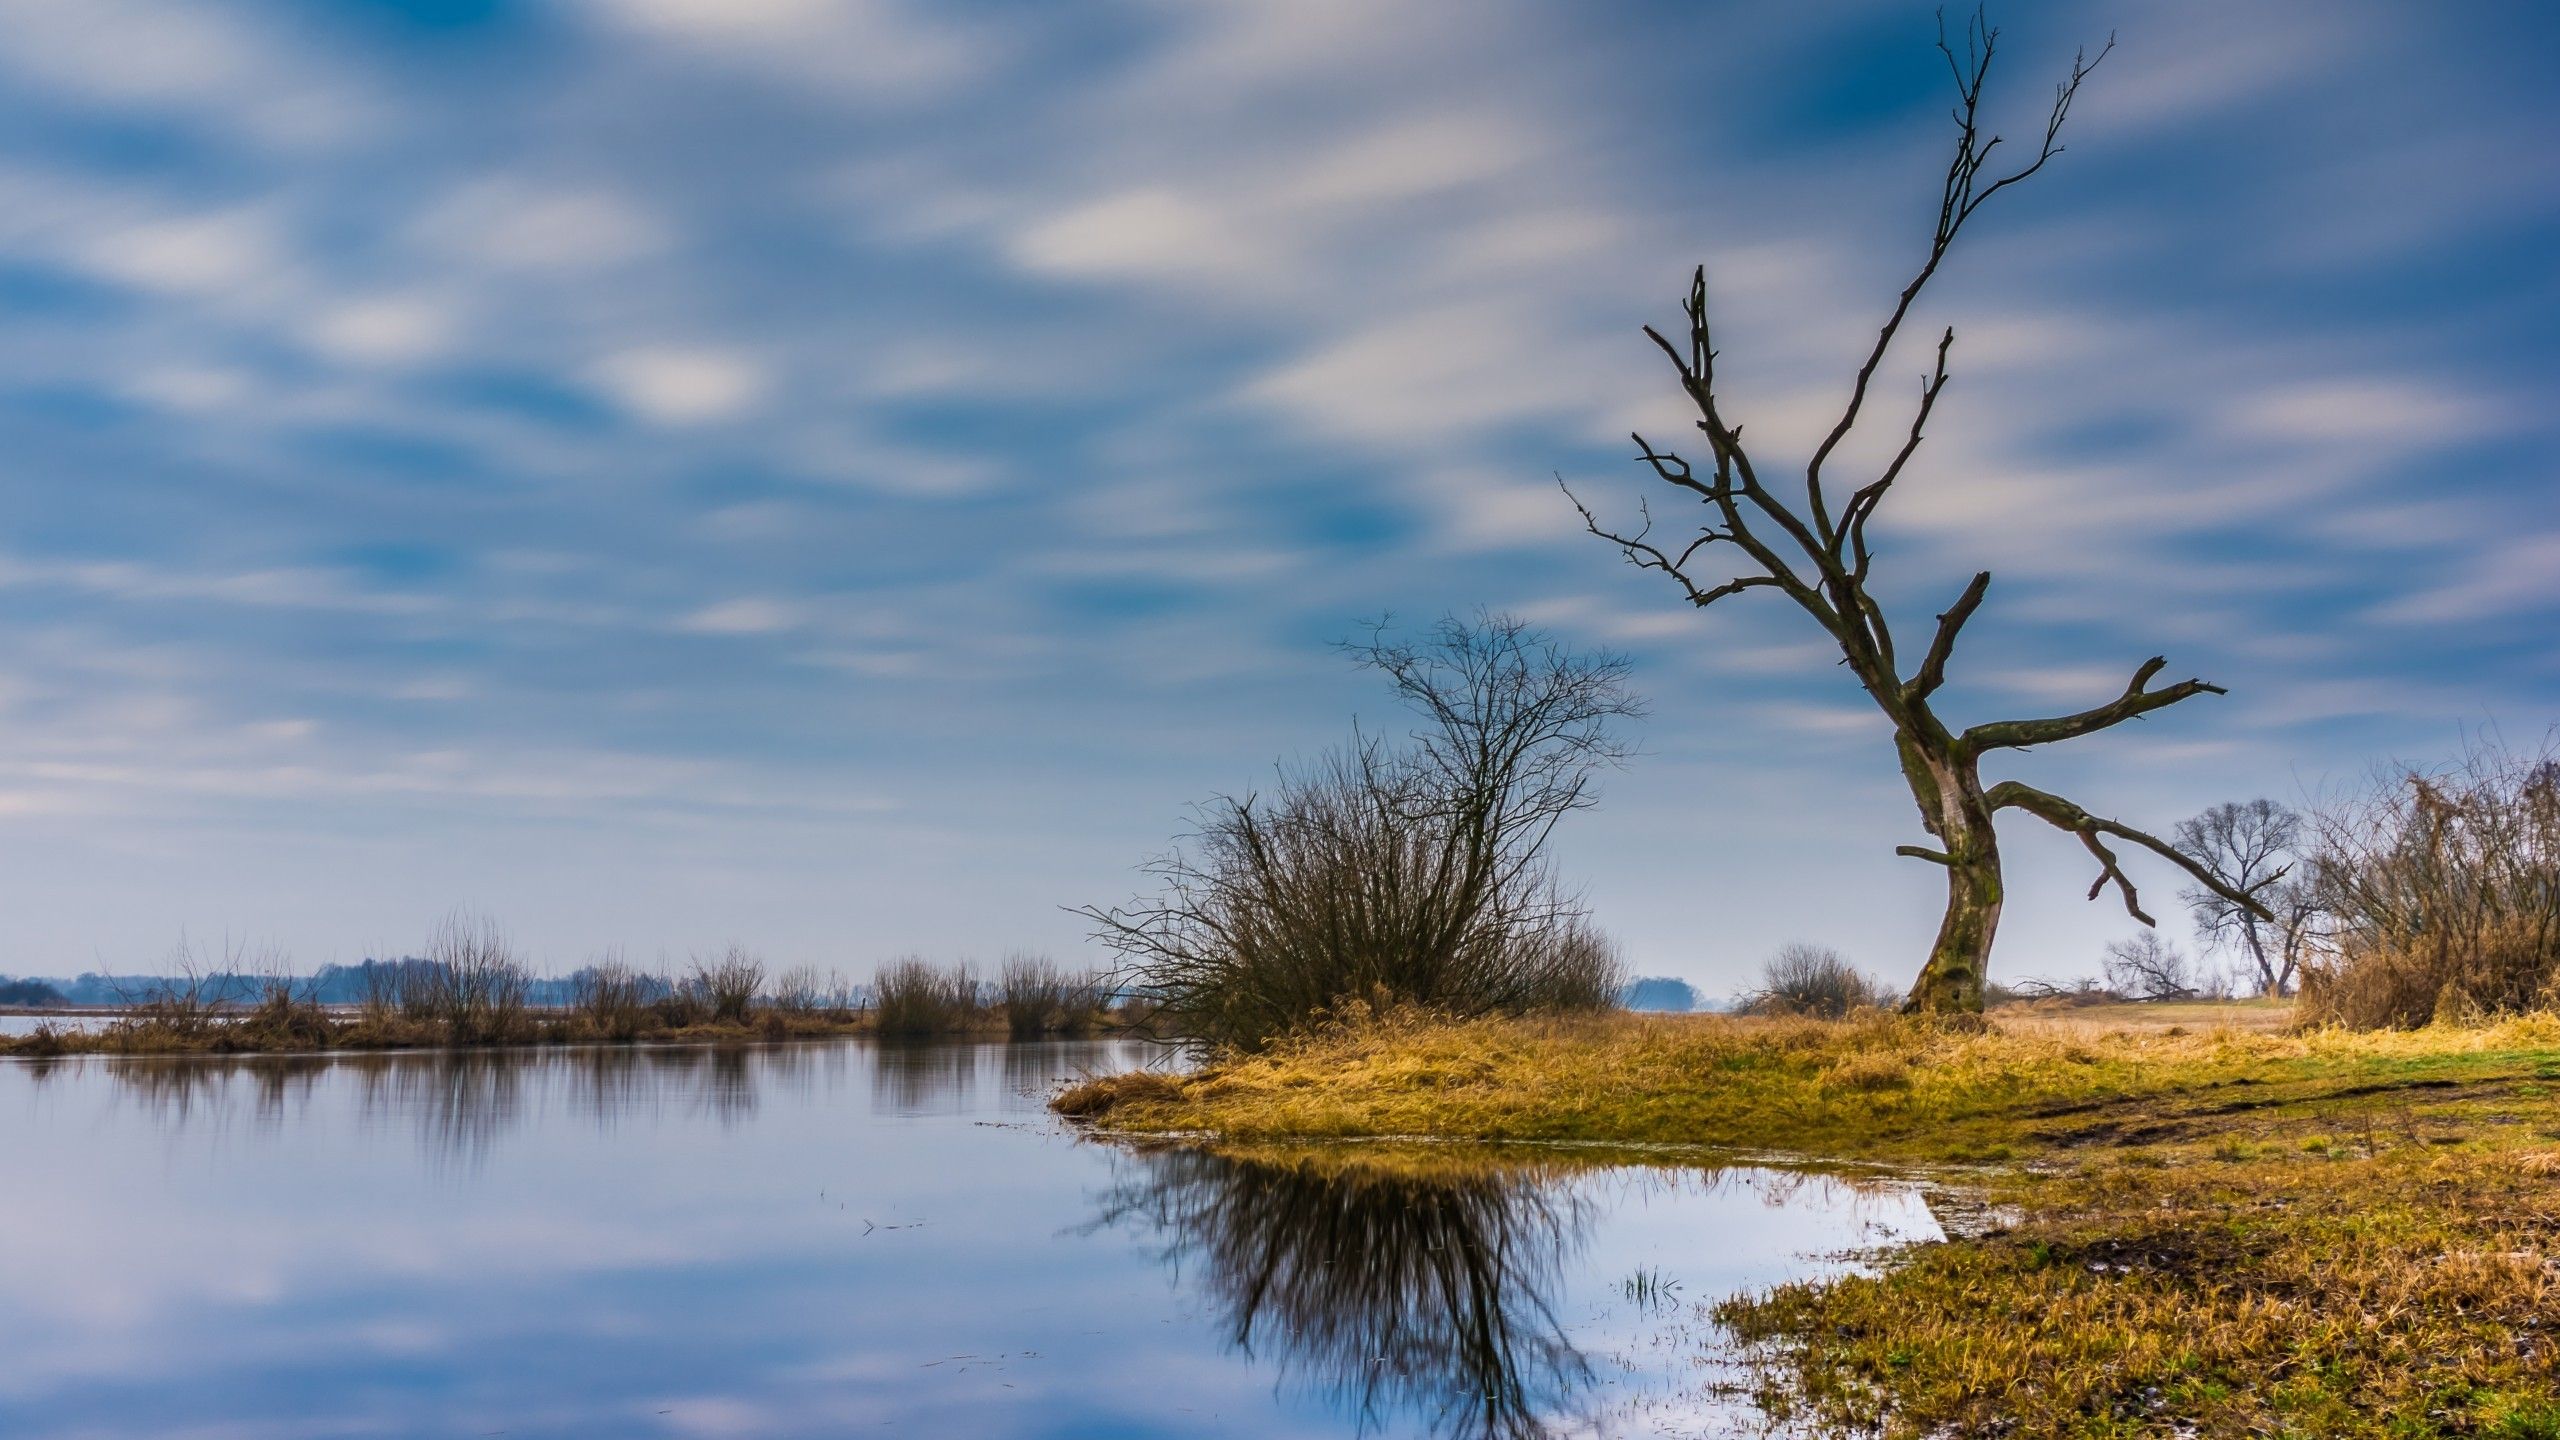 Download 2560x1440 Podlasie, Tree, Reflection, River, Clouds, Sky